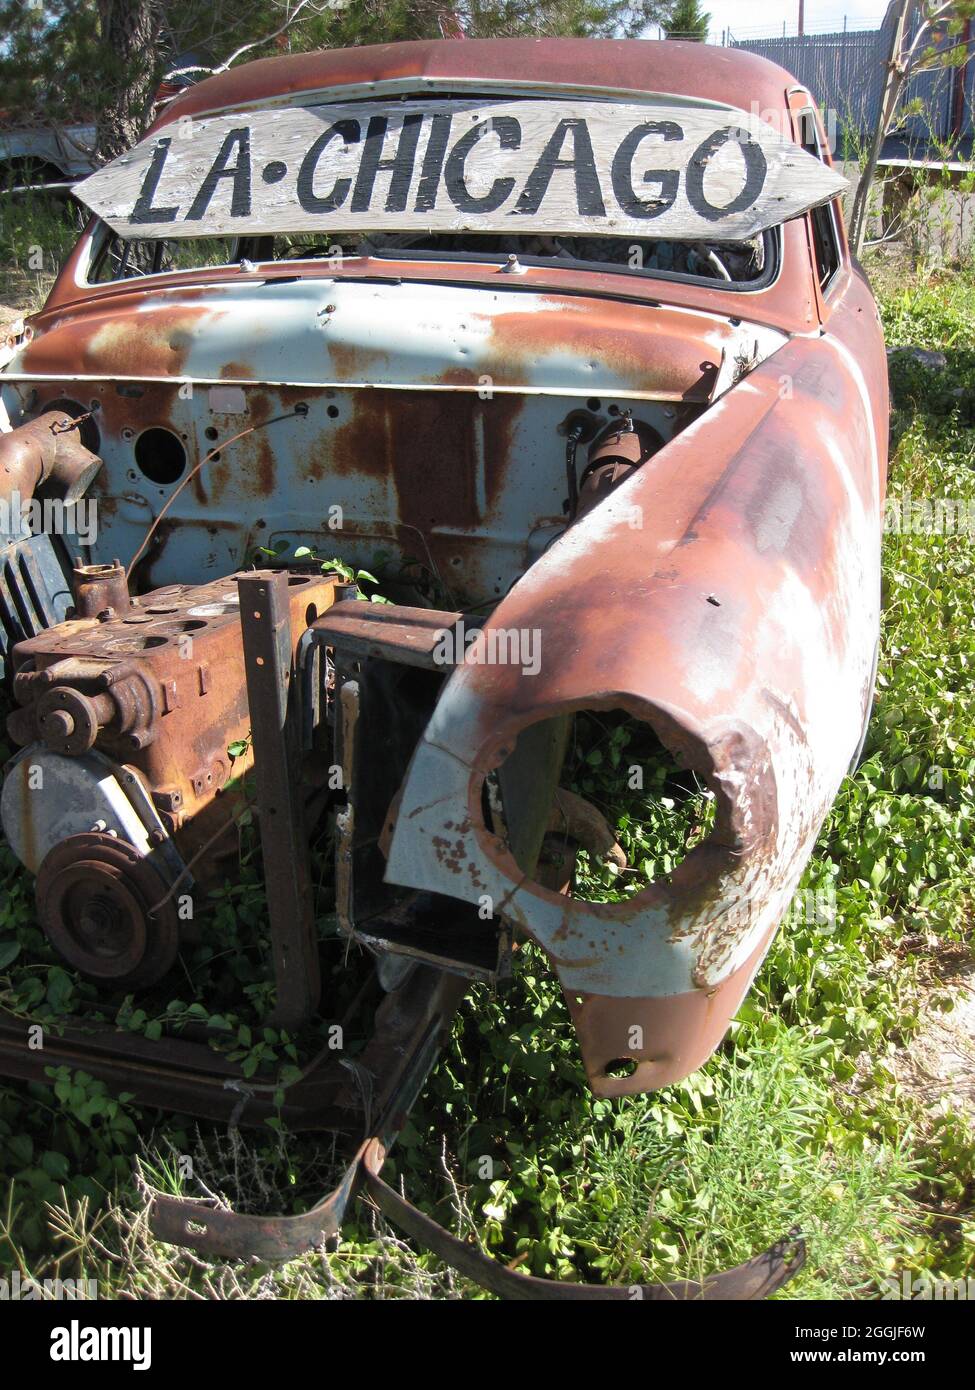 An old rusted-out vintage car covered in overgrowth with a sign saying LA - Chicago Stock Photo